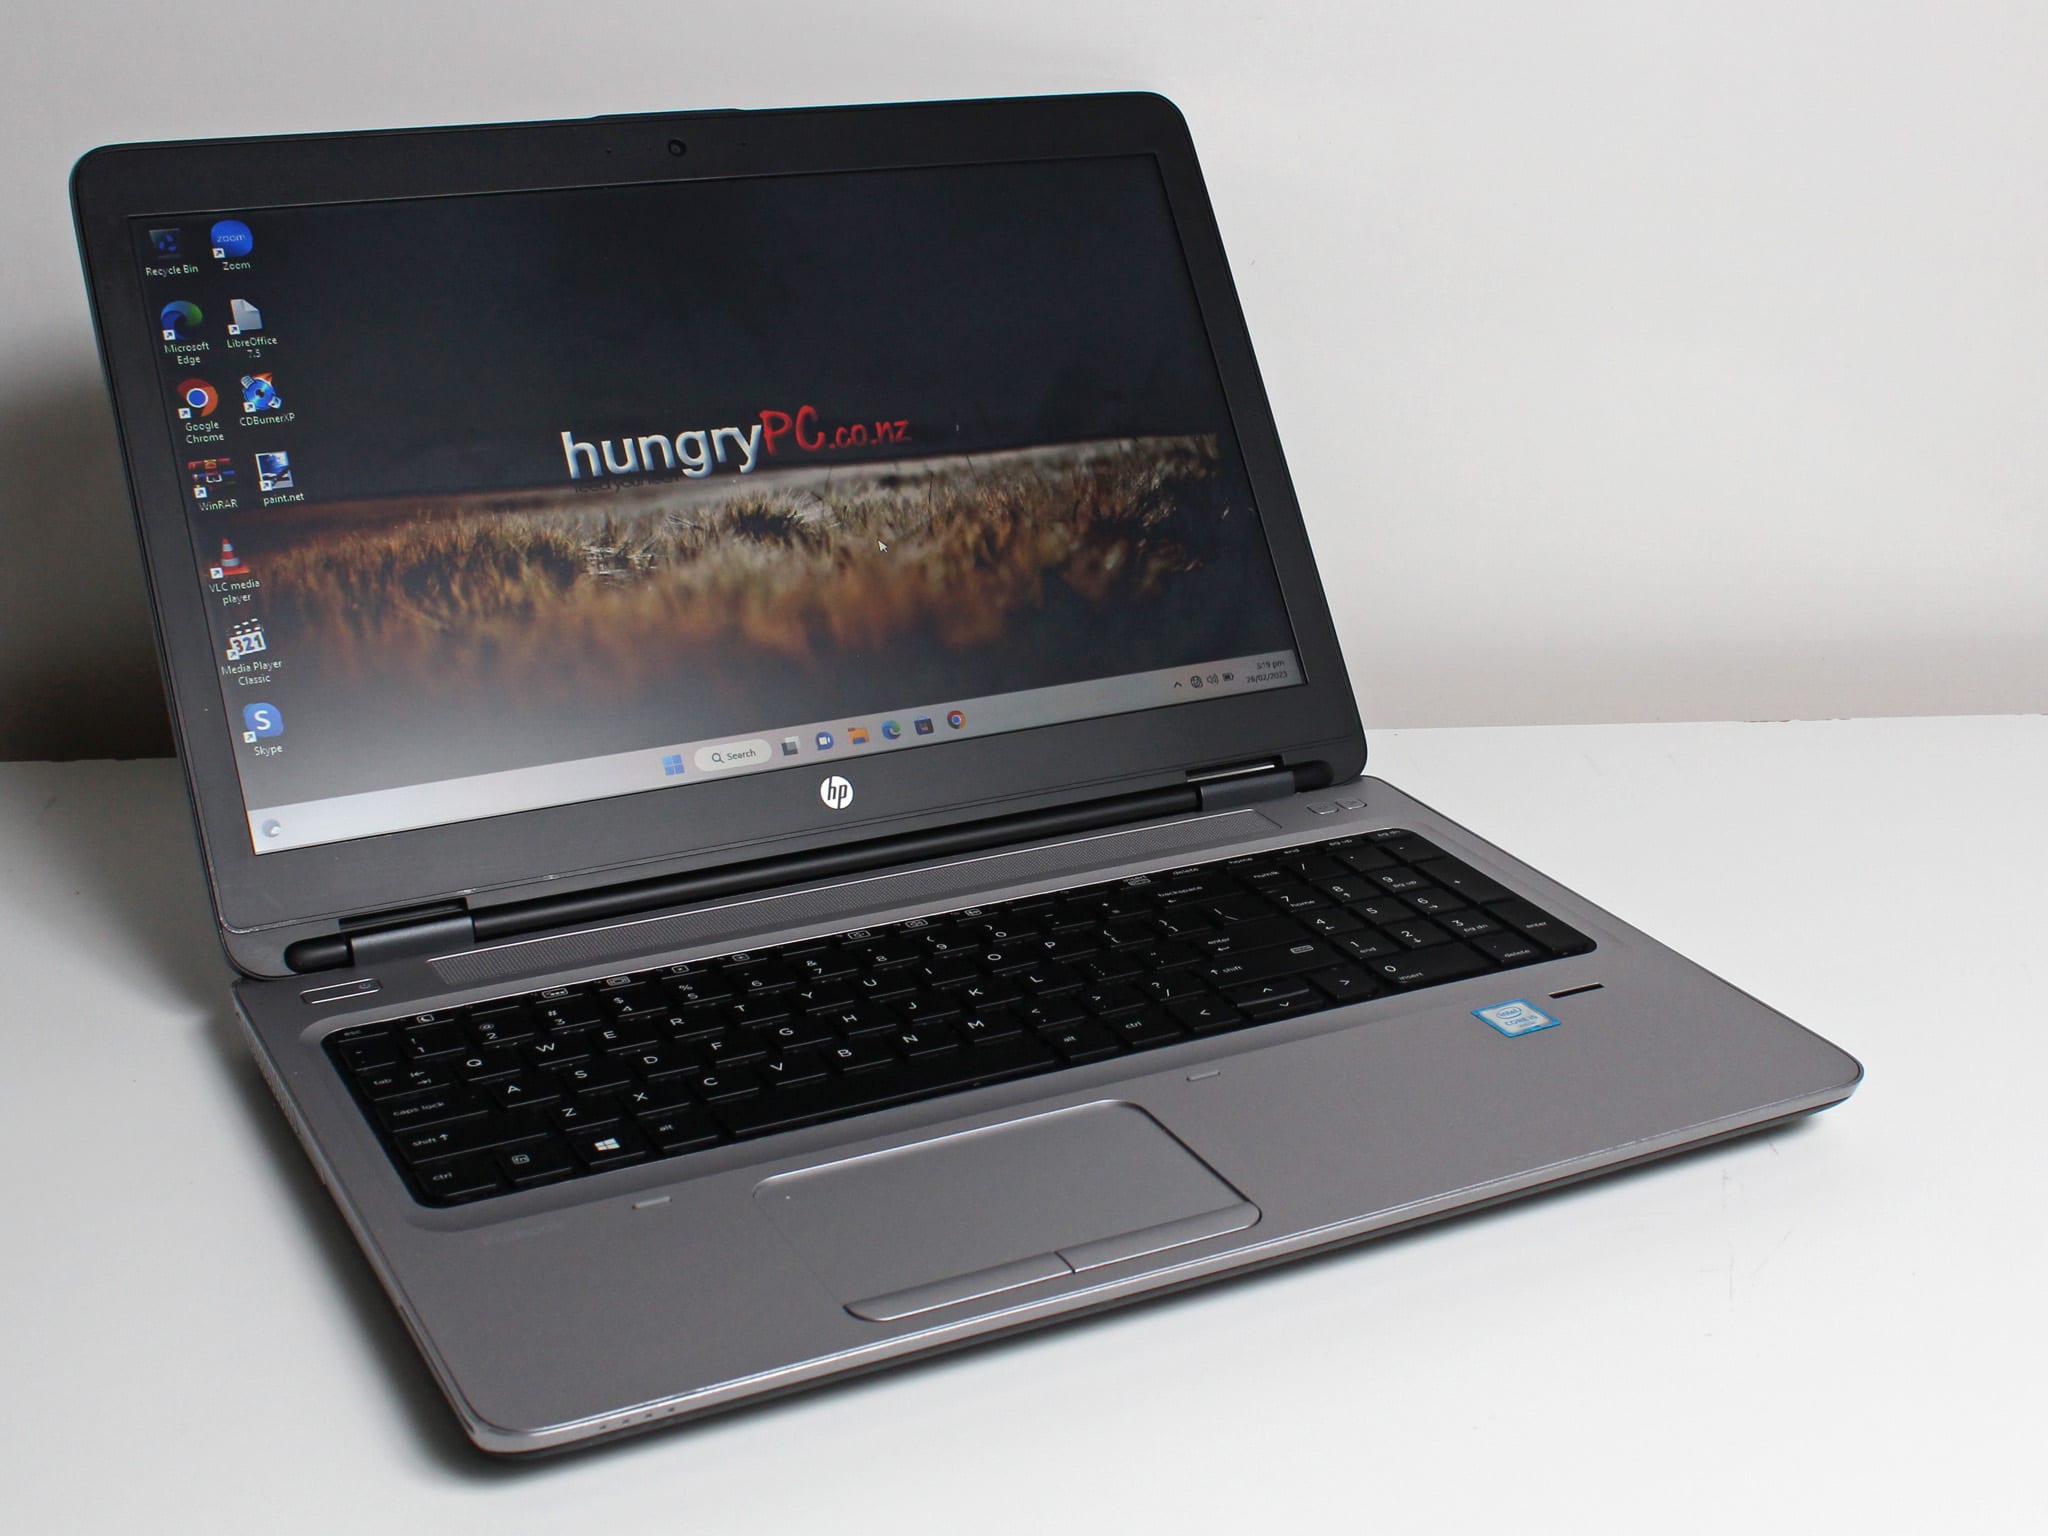 hp probook 650 g2 refurbished with core i5 6th generation processor